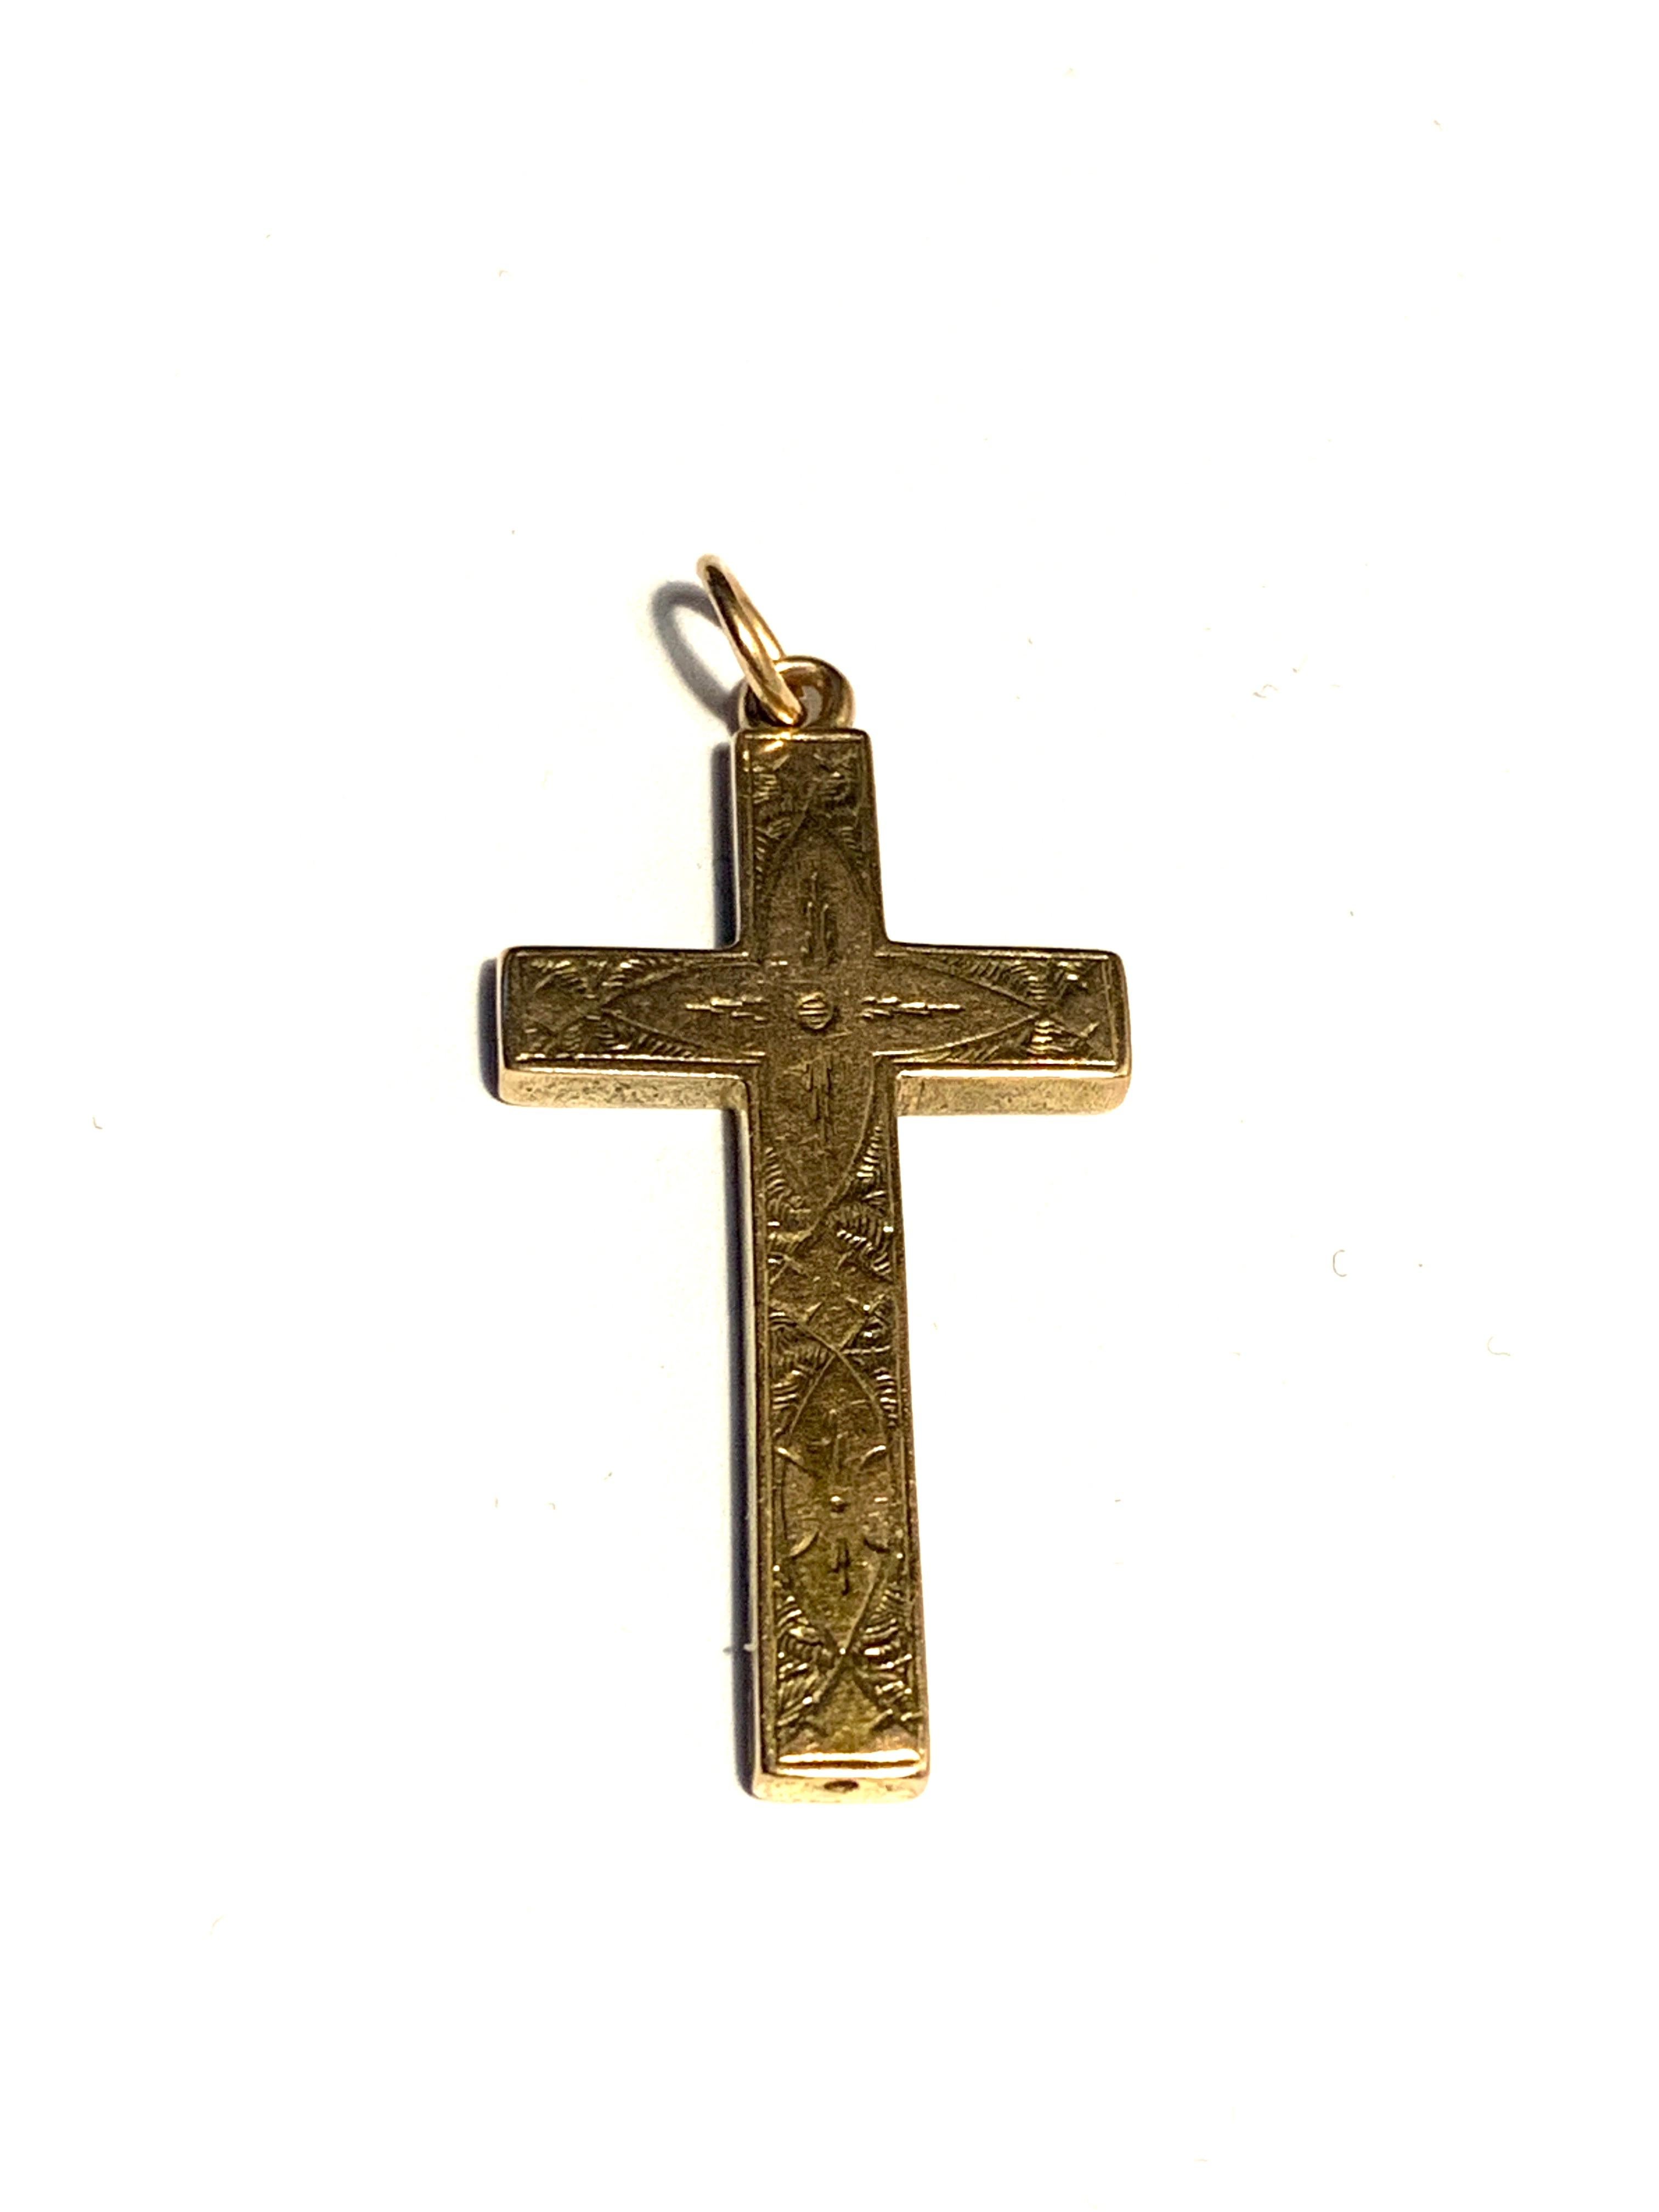 15ct Gold Antique Cross
with hand engraved foliage style design decoration
Circa 1845 - mid Victorian period
Size      3.5 cm x 2 cm
Weight  1.86 grams